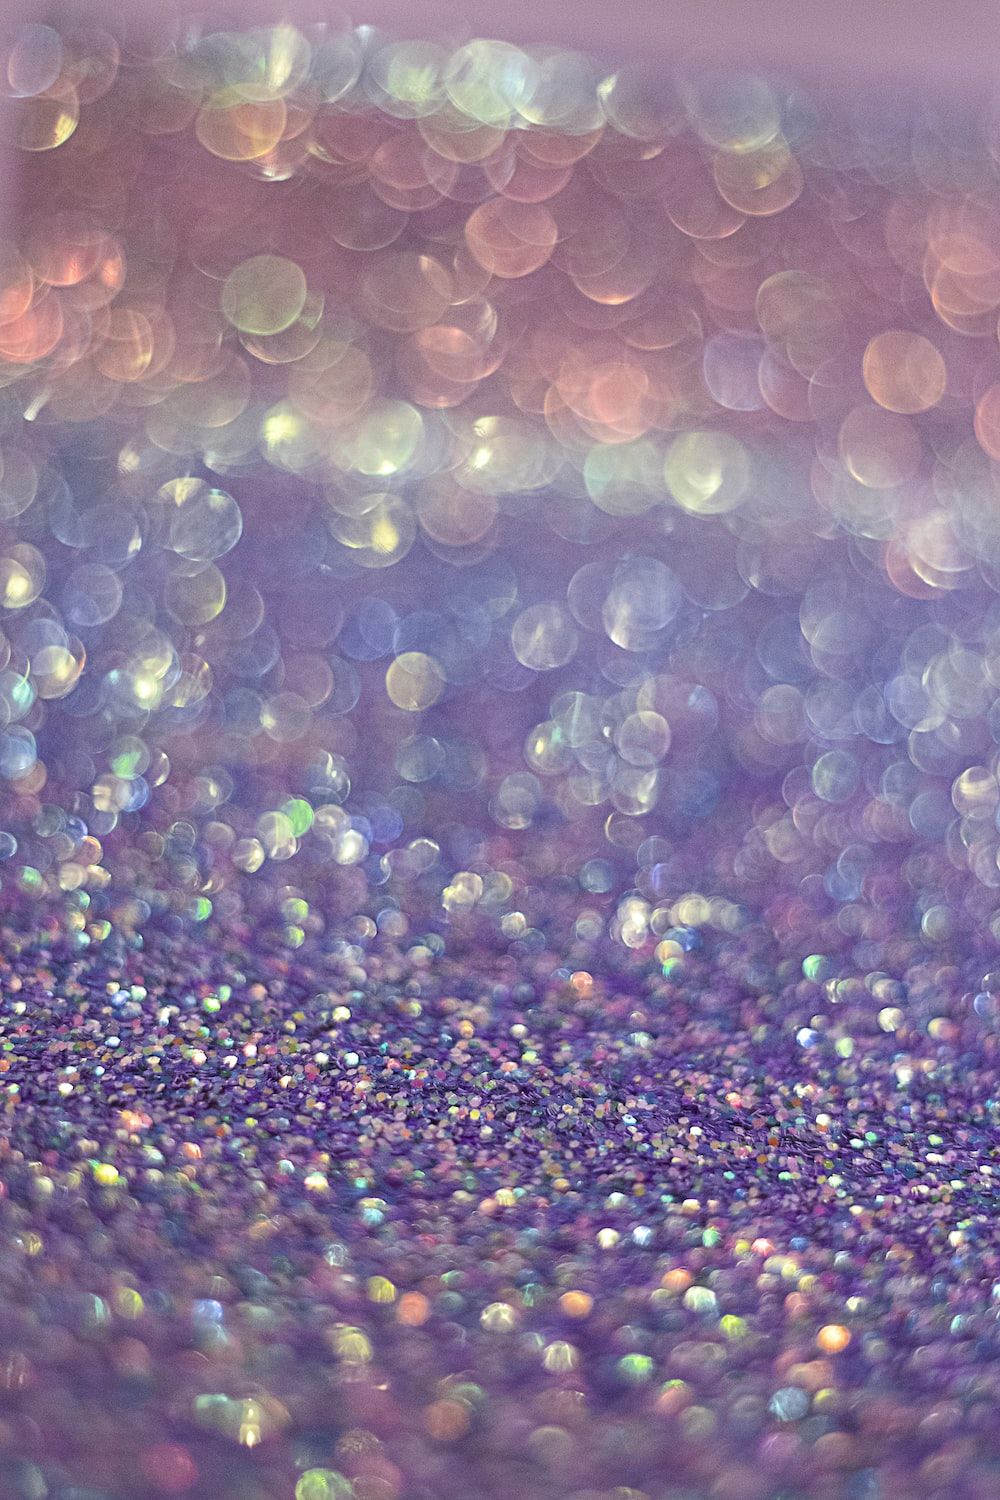 A close up of some glitter on the ground - Bling